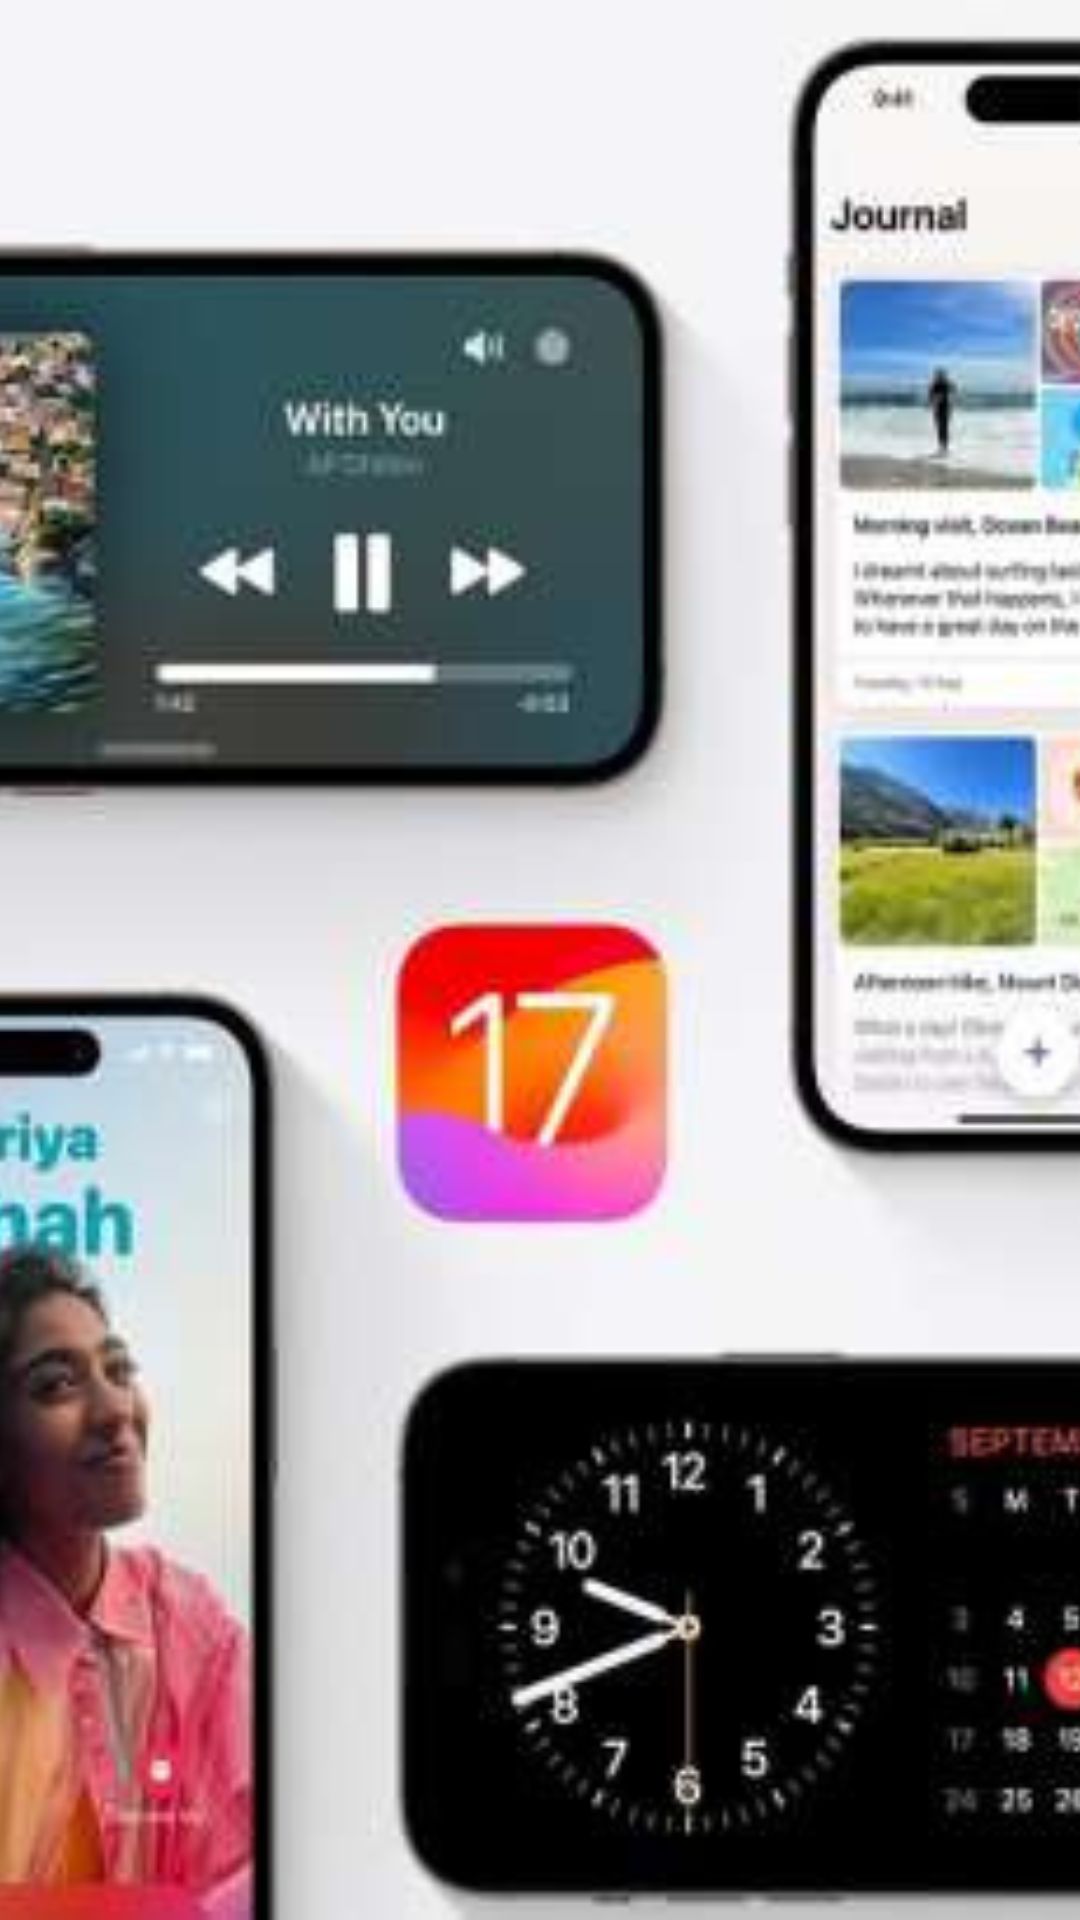 How to install iOS 17 on your iPhone: A simple step-by-step guide 

